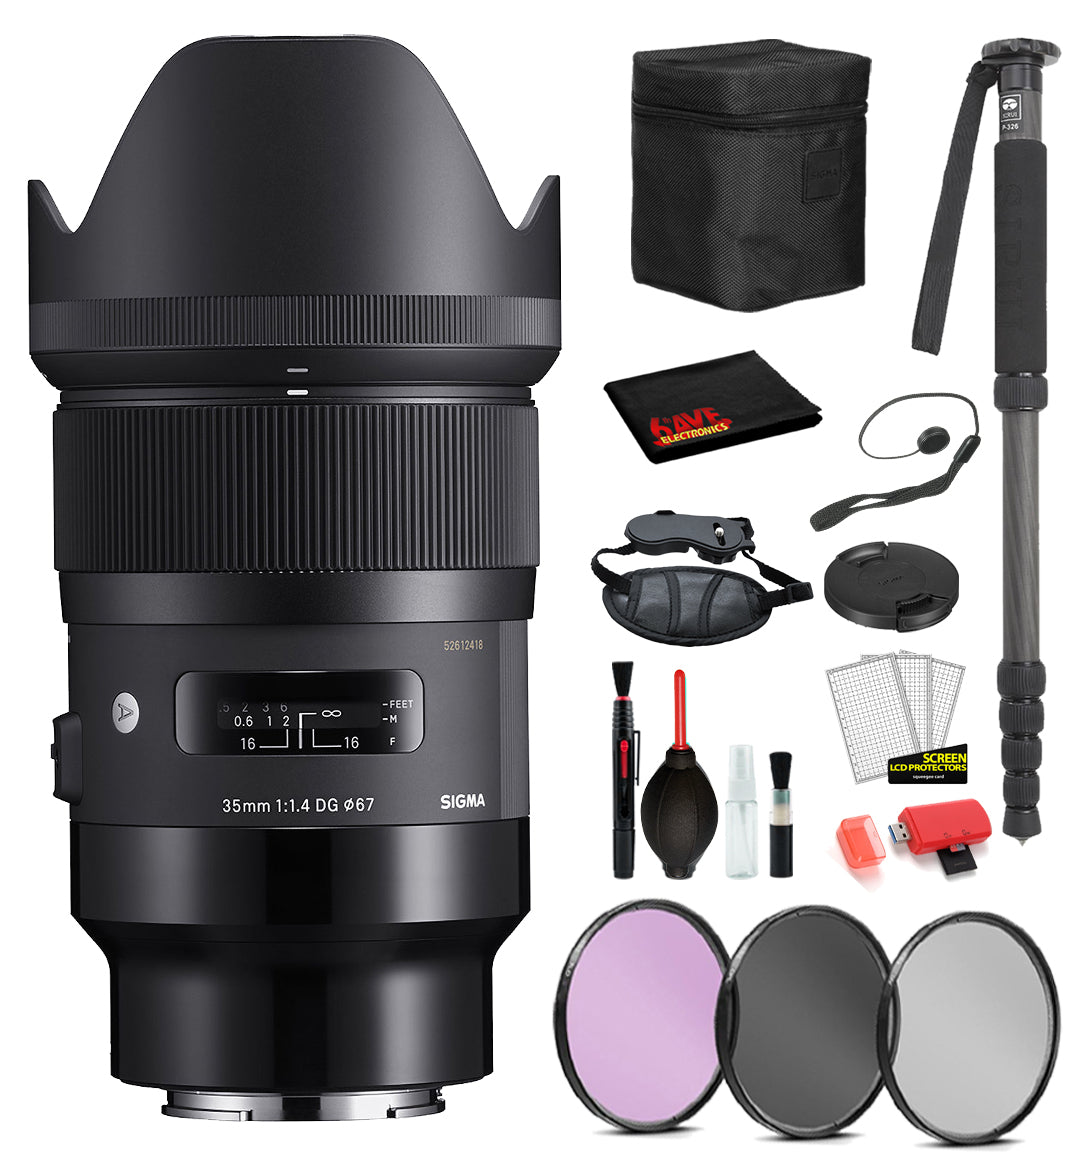 Sigma 35mm f/1.4 DG HSM Art Lens for Sony E Mount (340965) with: Pro Series Monopod, 3PC Filter Kit + More